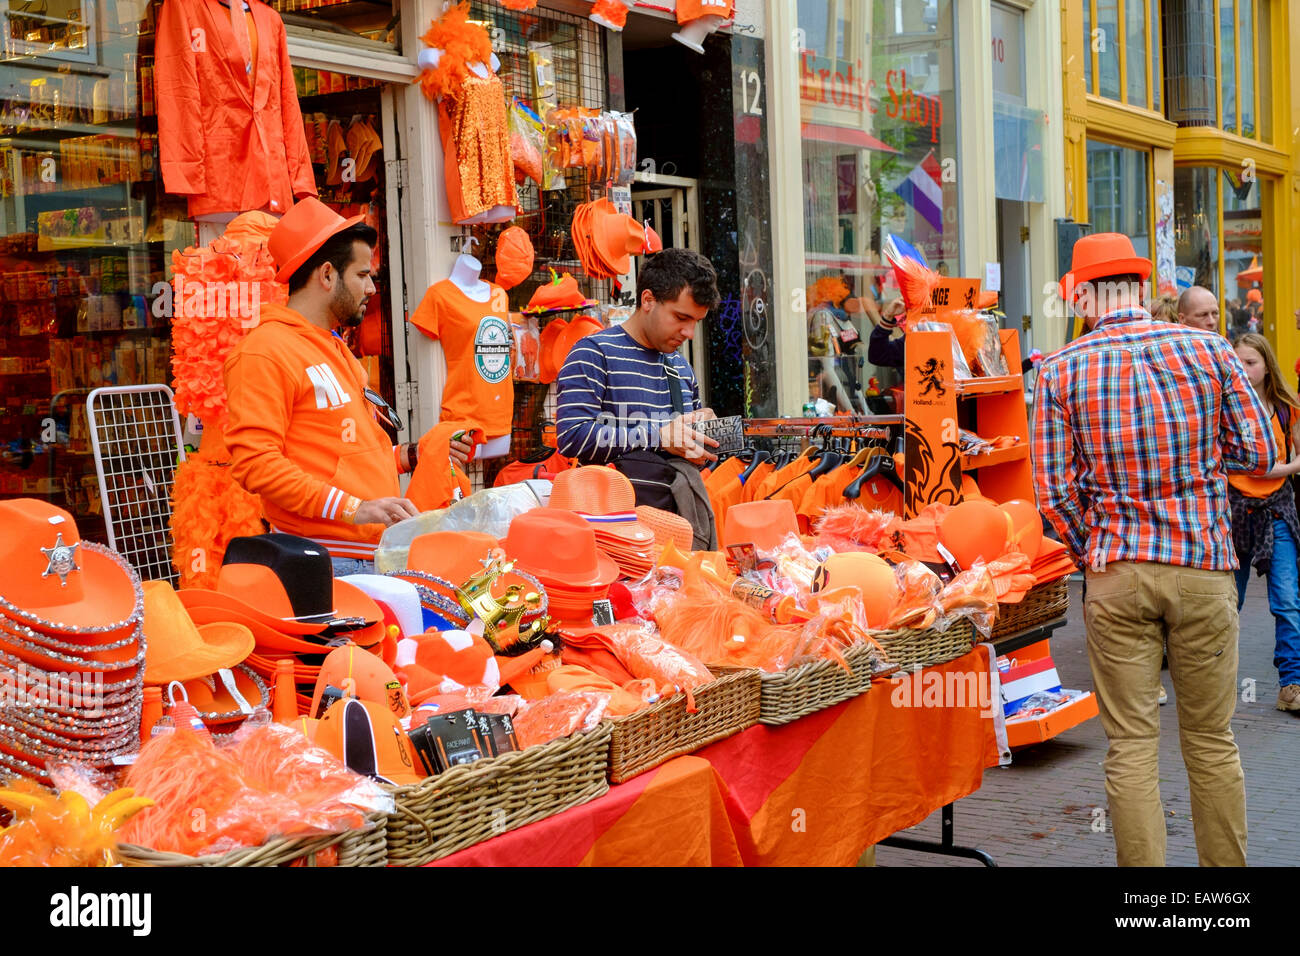 Vendors sell souvenirs and clothing in orange, the Dutch national color,  for King's Day. Former Queen?s Day, held since 1890, became King?s Day, or  Koningsdag this year. The change came last year